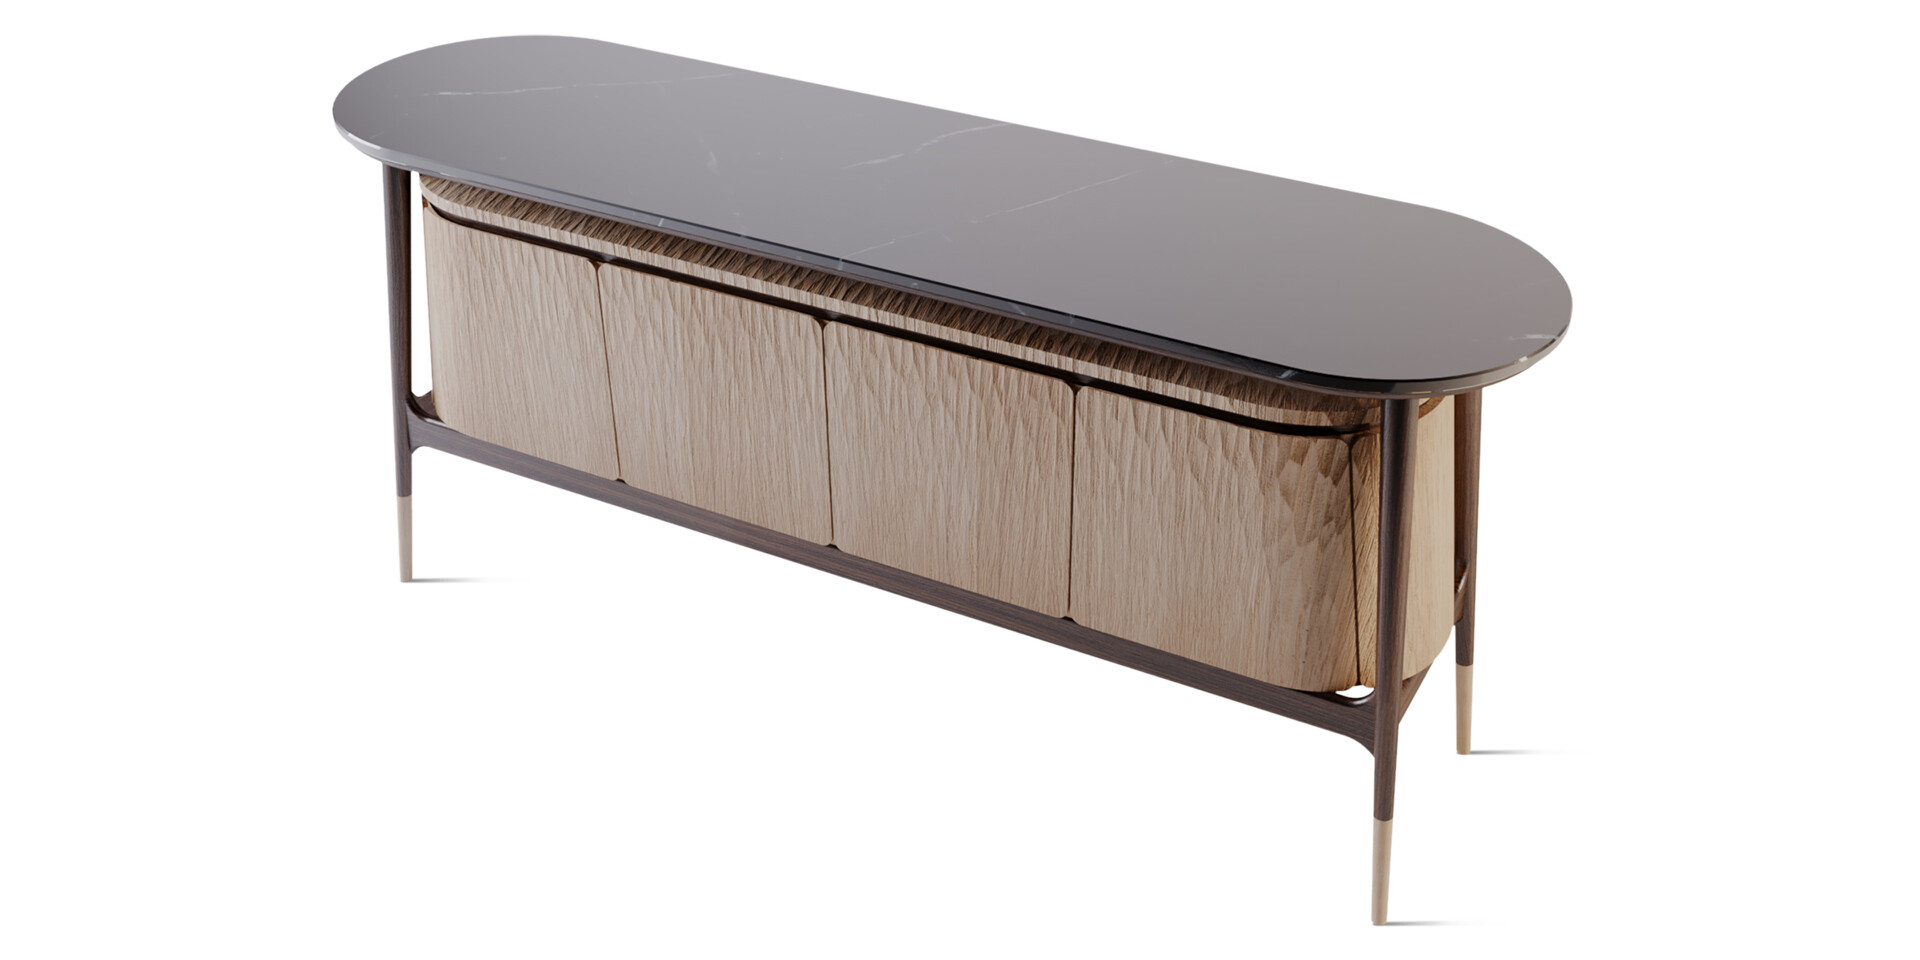 AT TURAIF SIDEBOARD - Top Side View - ALMA de LUCE